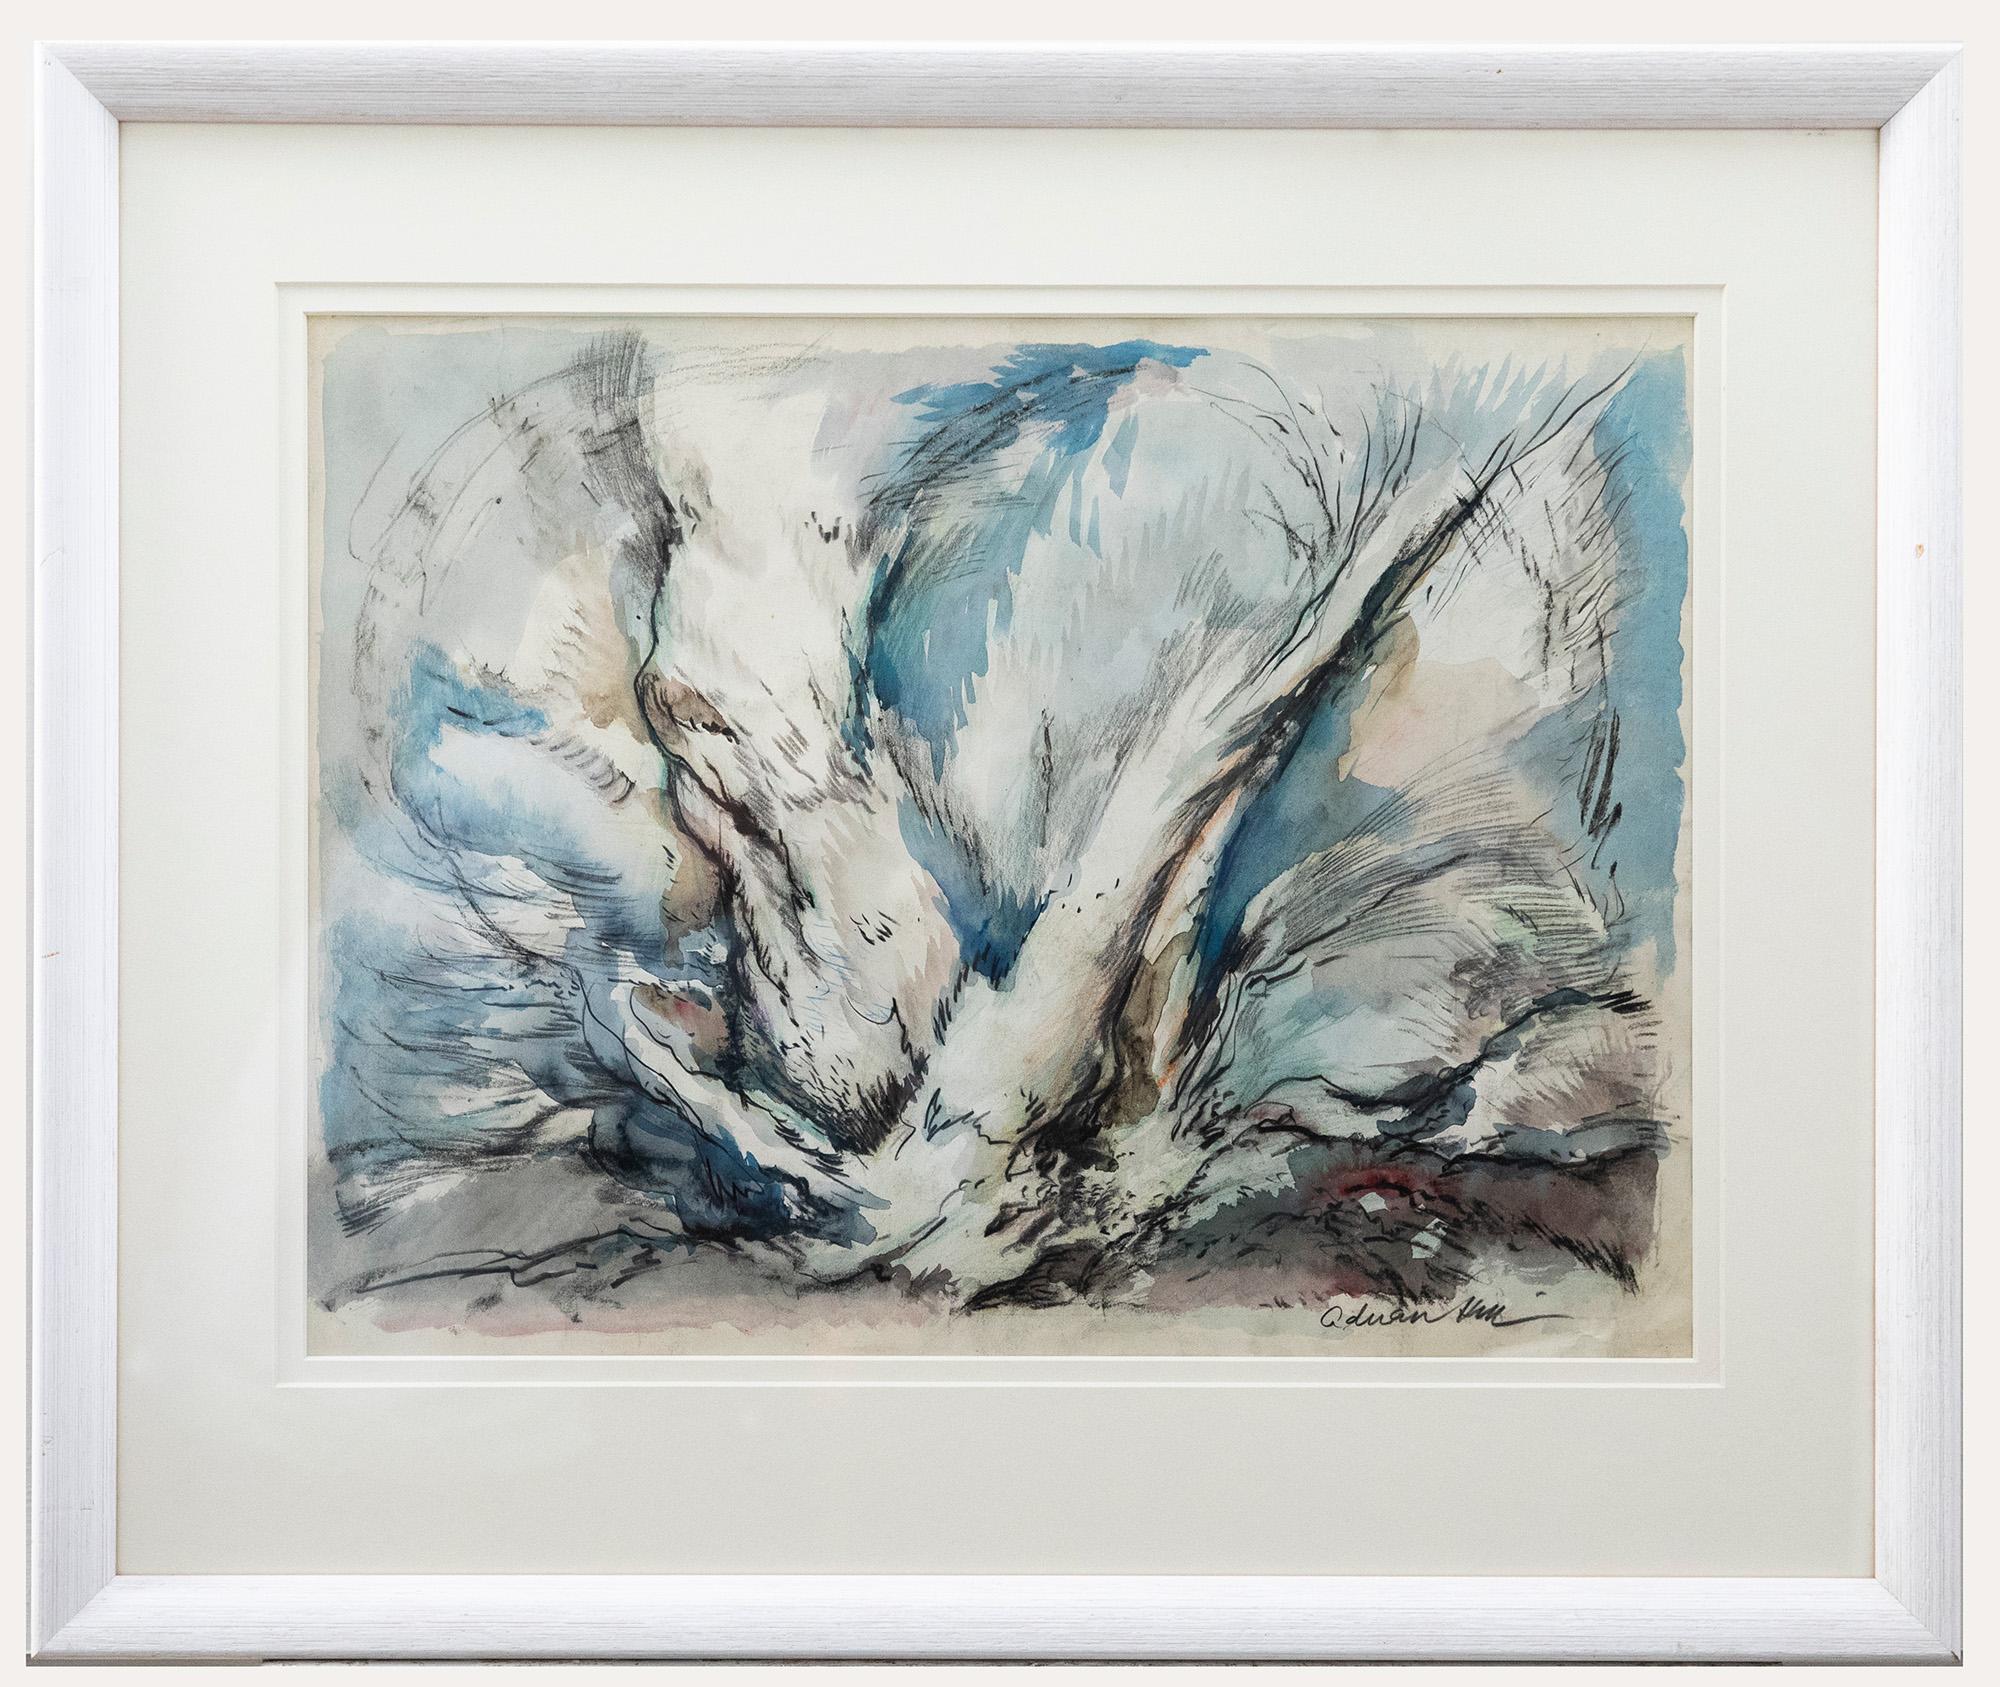 A dynamic charcoal and watercolour study of a large knotted tree by British artist Adrian Hill PROI RBA (1895-1977). Signed in charcoal to the lower right. Well-presented in a double card mount and white contemporary frame. On paper. 